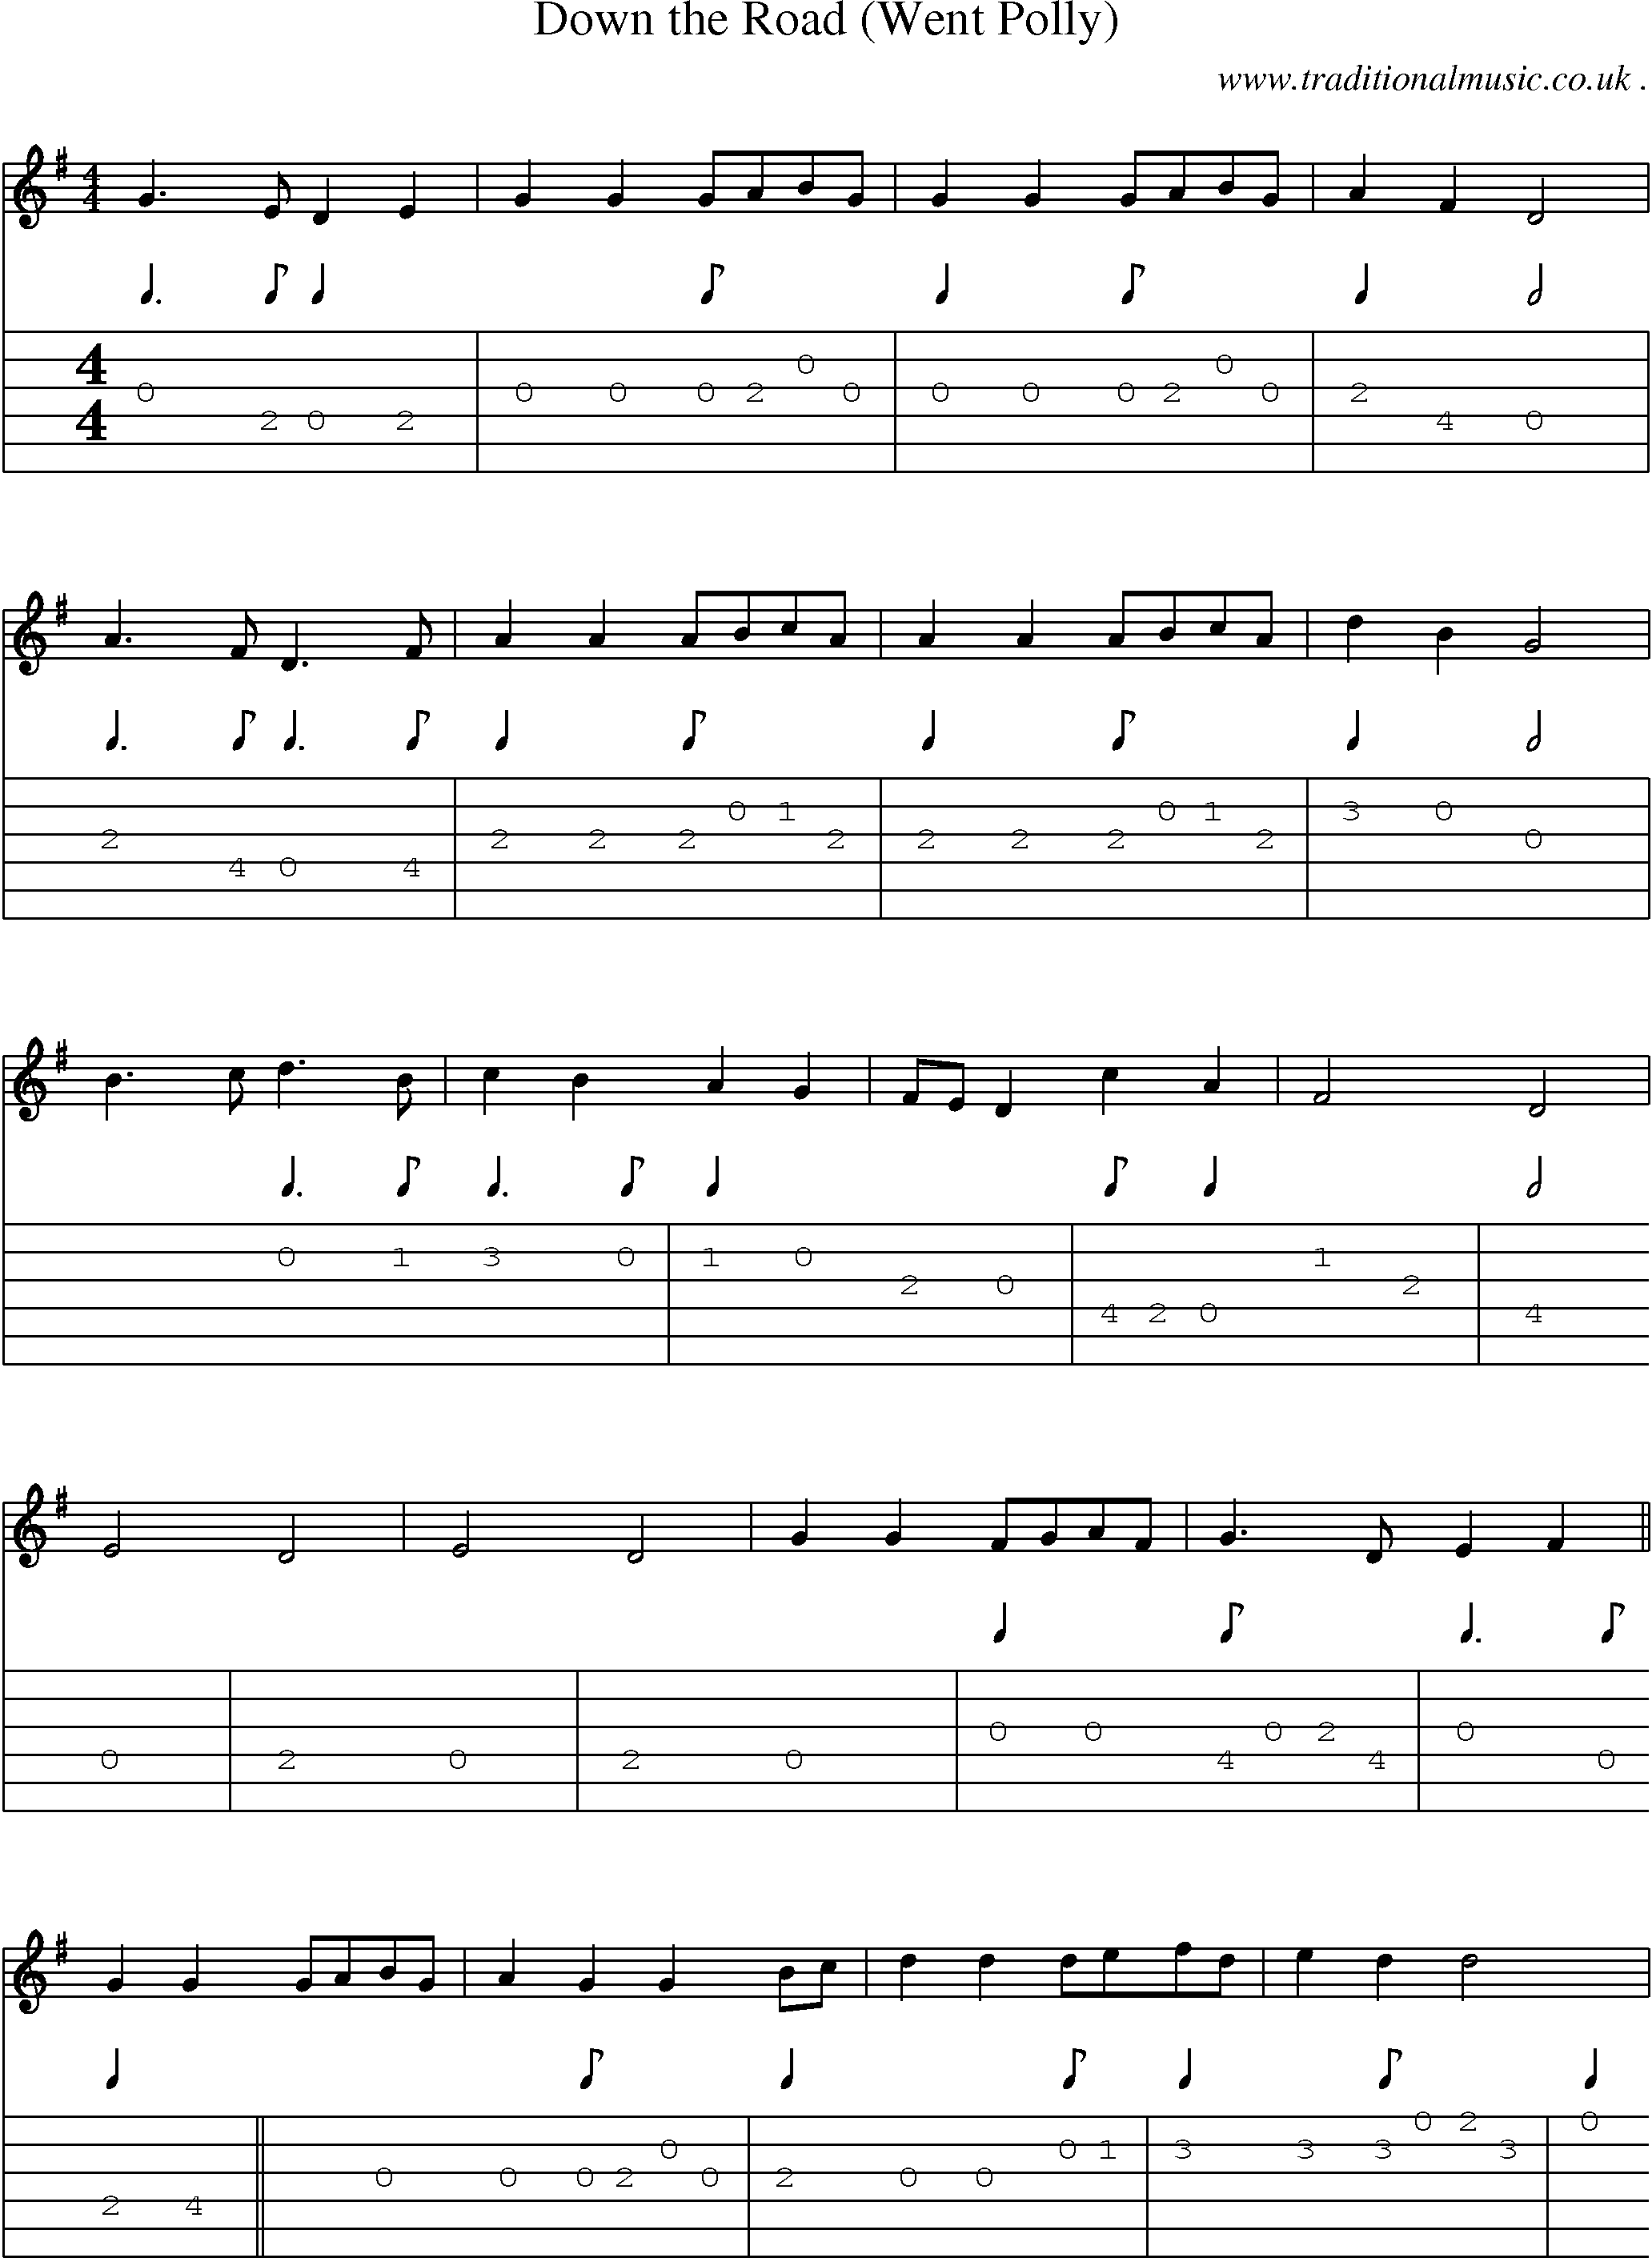 Sheet-music  score, Chords and Guitar Tabs for Down The Road Went Polly